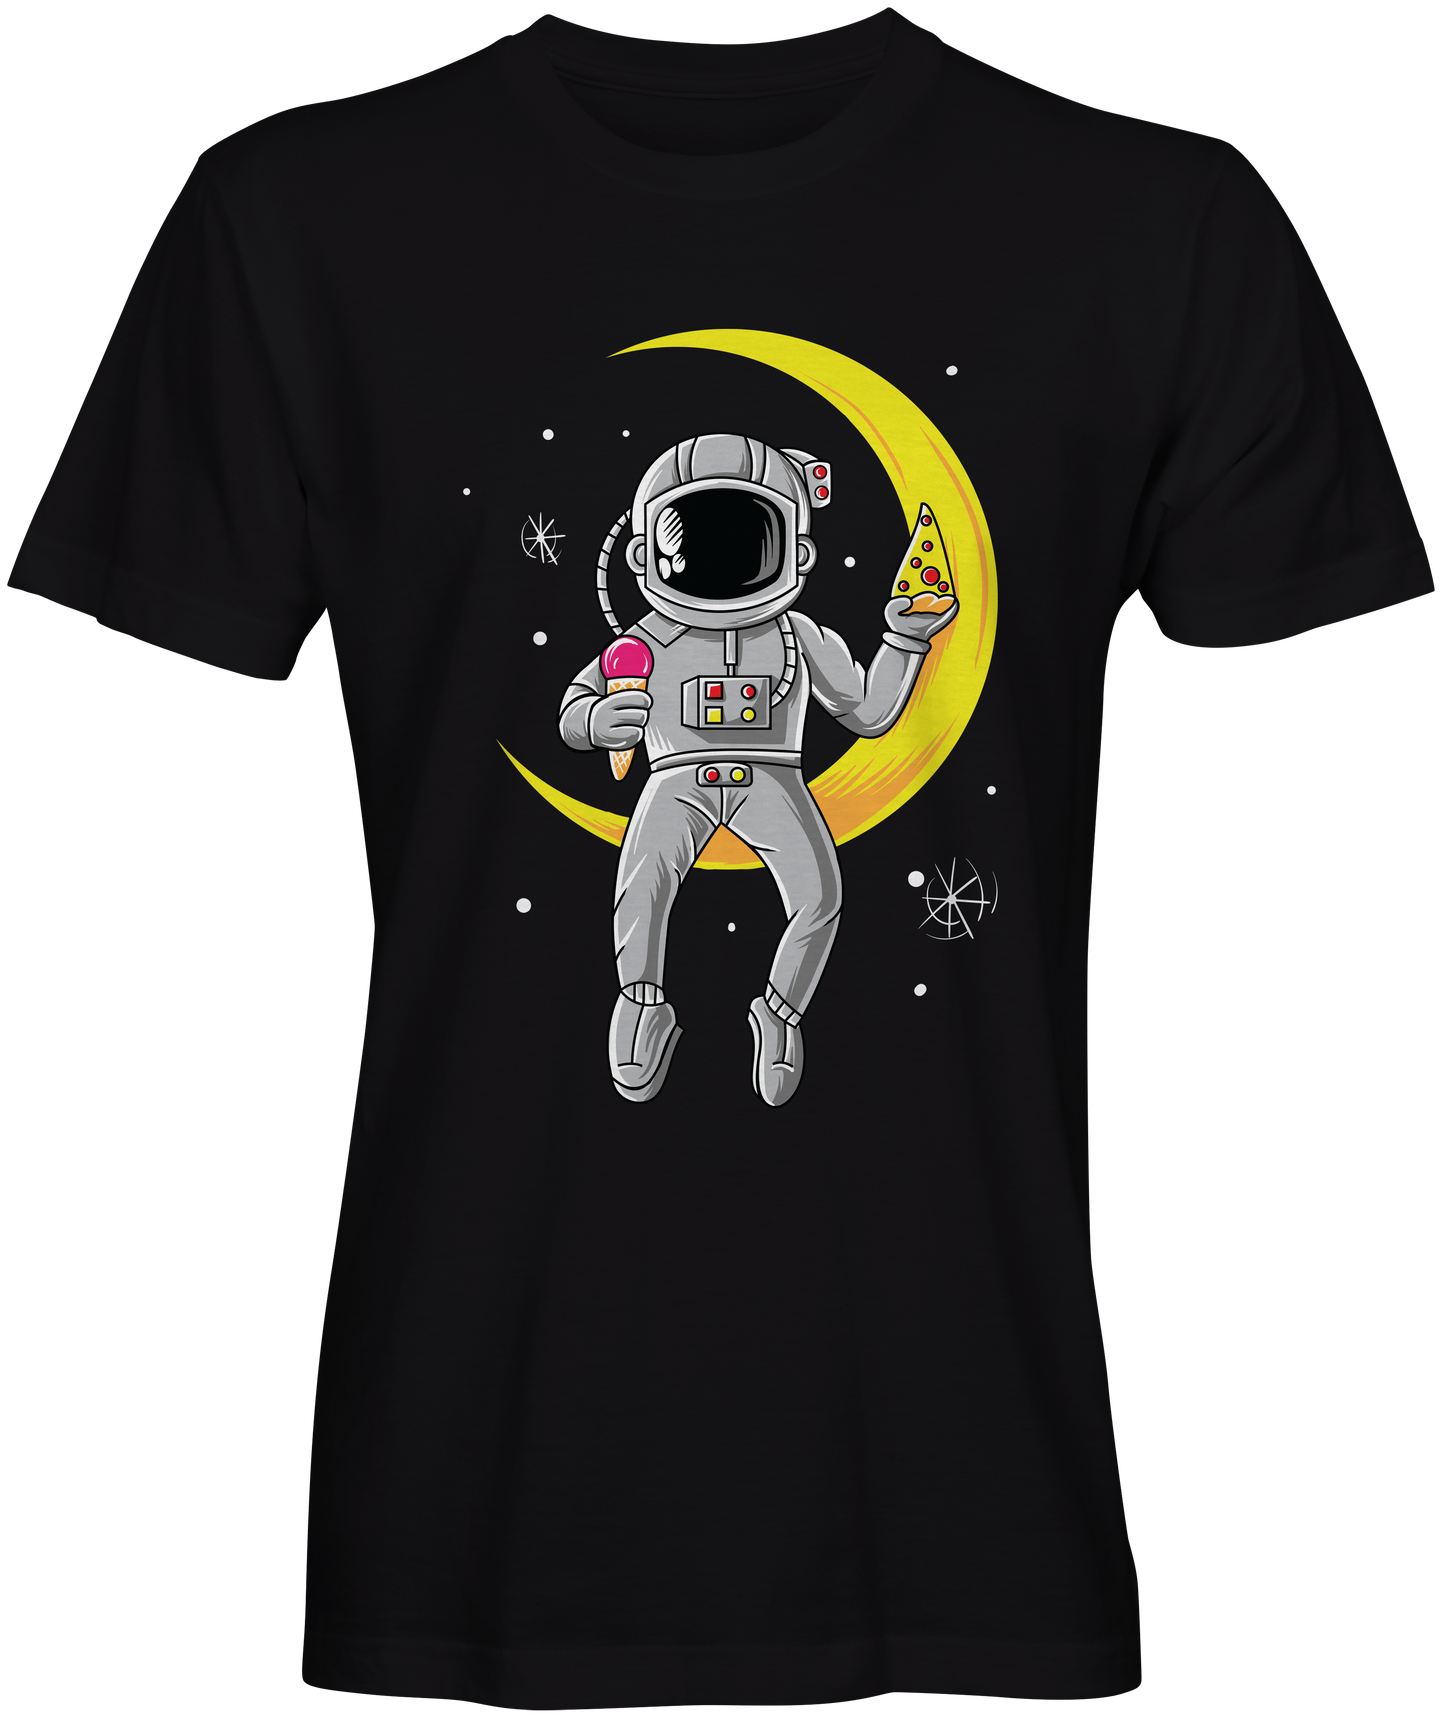 Moon Pizza T-shirt for Sale